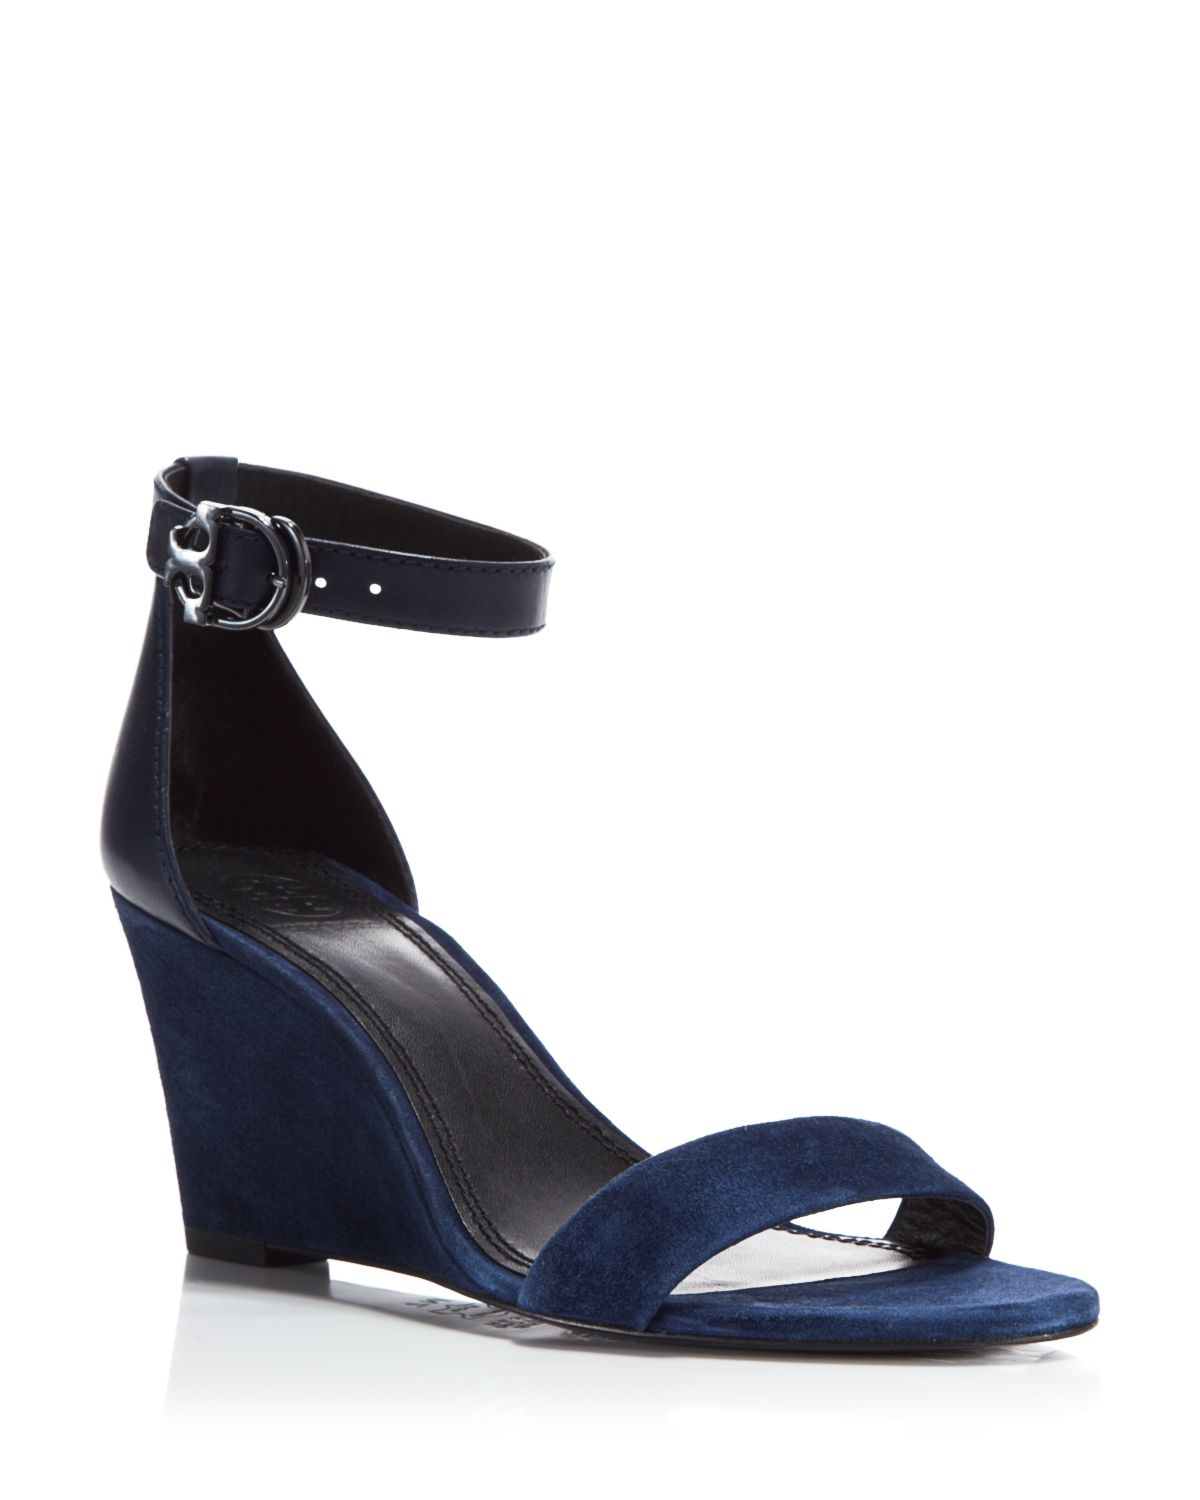 Lyst - Tory Burch Ankle Strap Wedge Sandals - Grant Suede in Blue